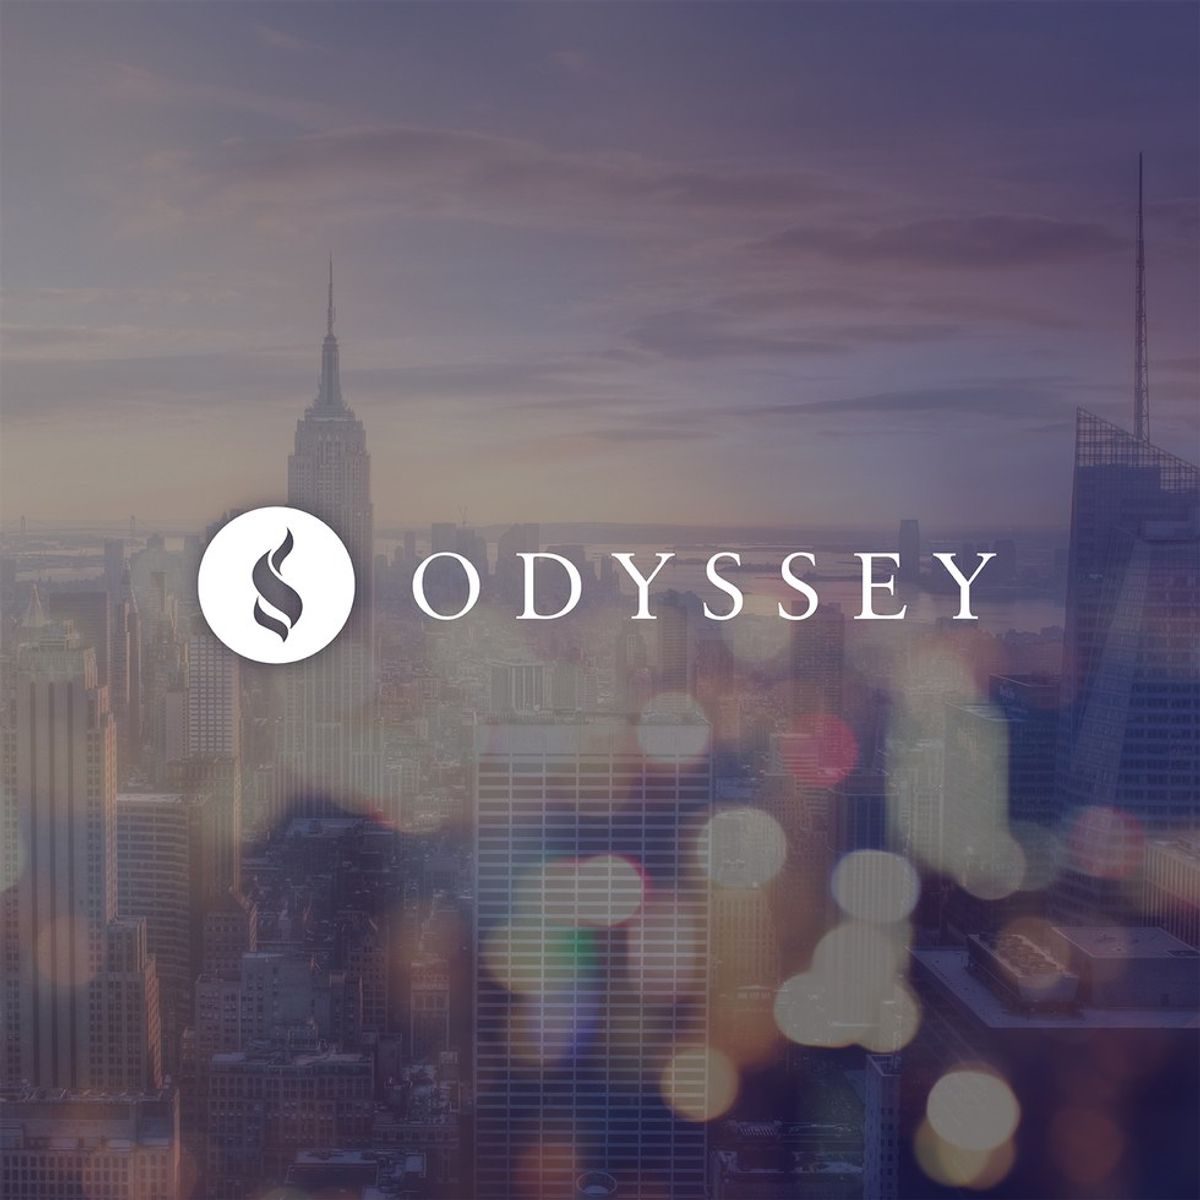 6 Things I Have Gained By Writing With Odyssey